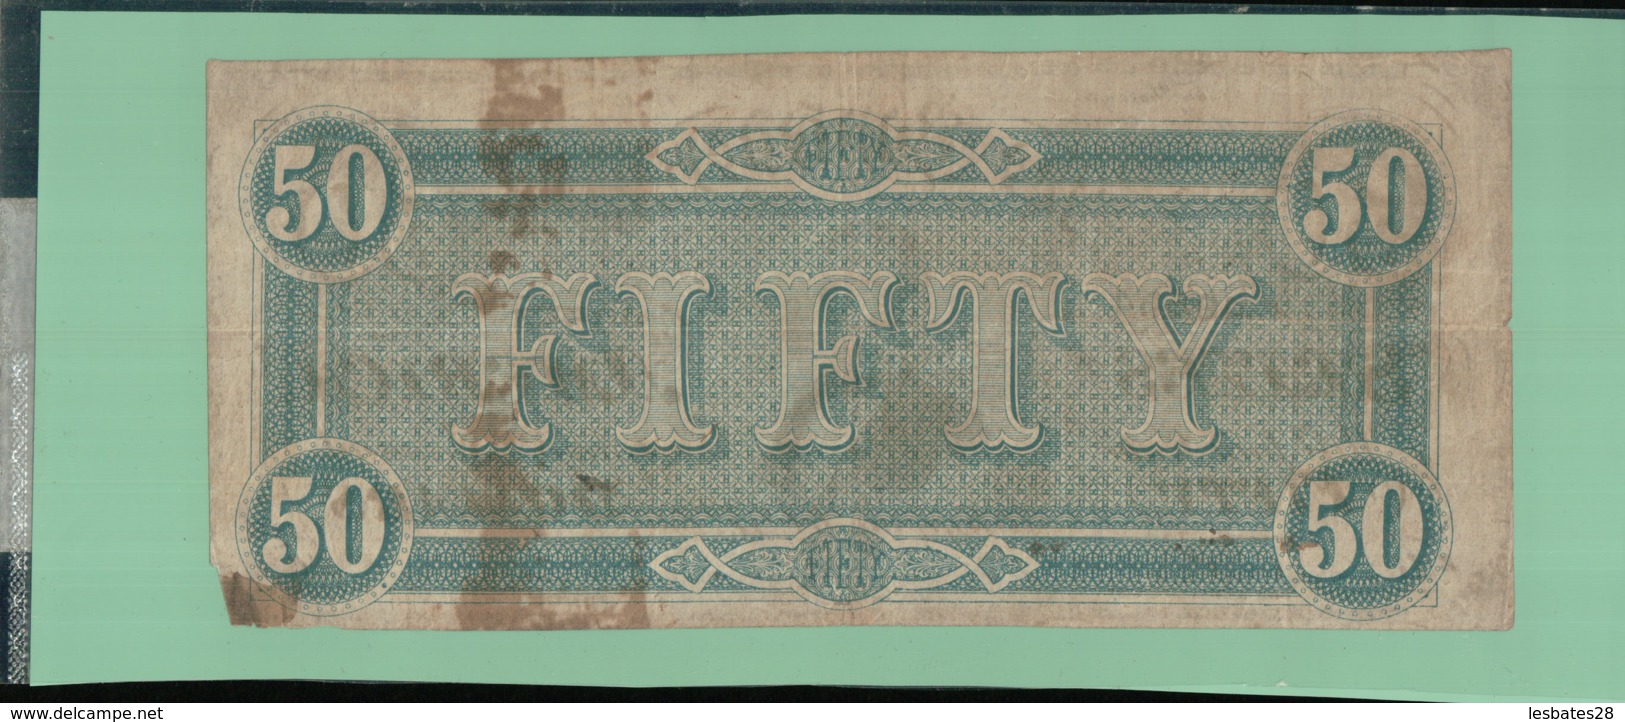 BILLET BANQUE  ATAT-UNIS 50 Dollars 1864 The Confederate States Of America 1864-02-17  -sept  2019  Alb Bil - Confederate Currency (1861-1864)